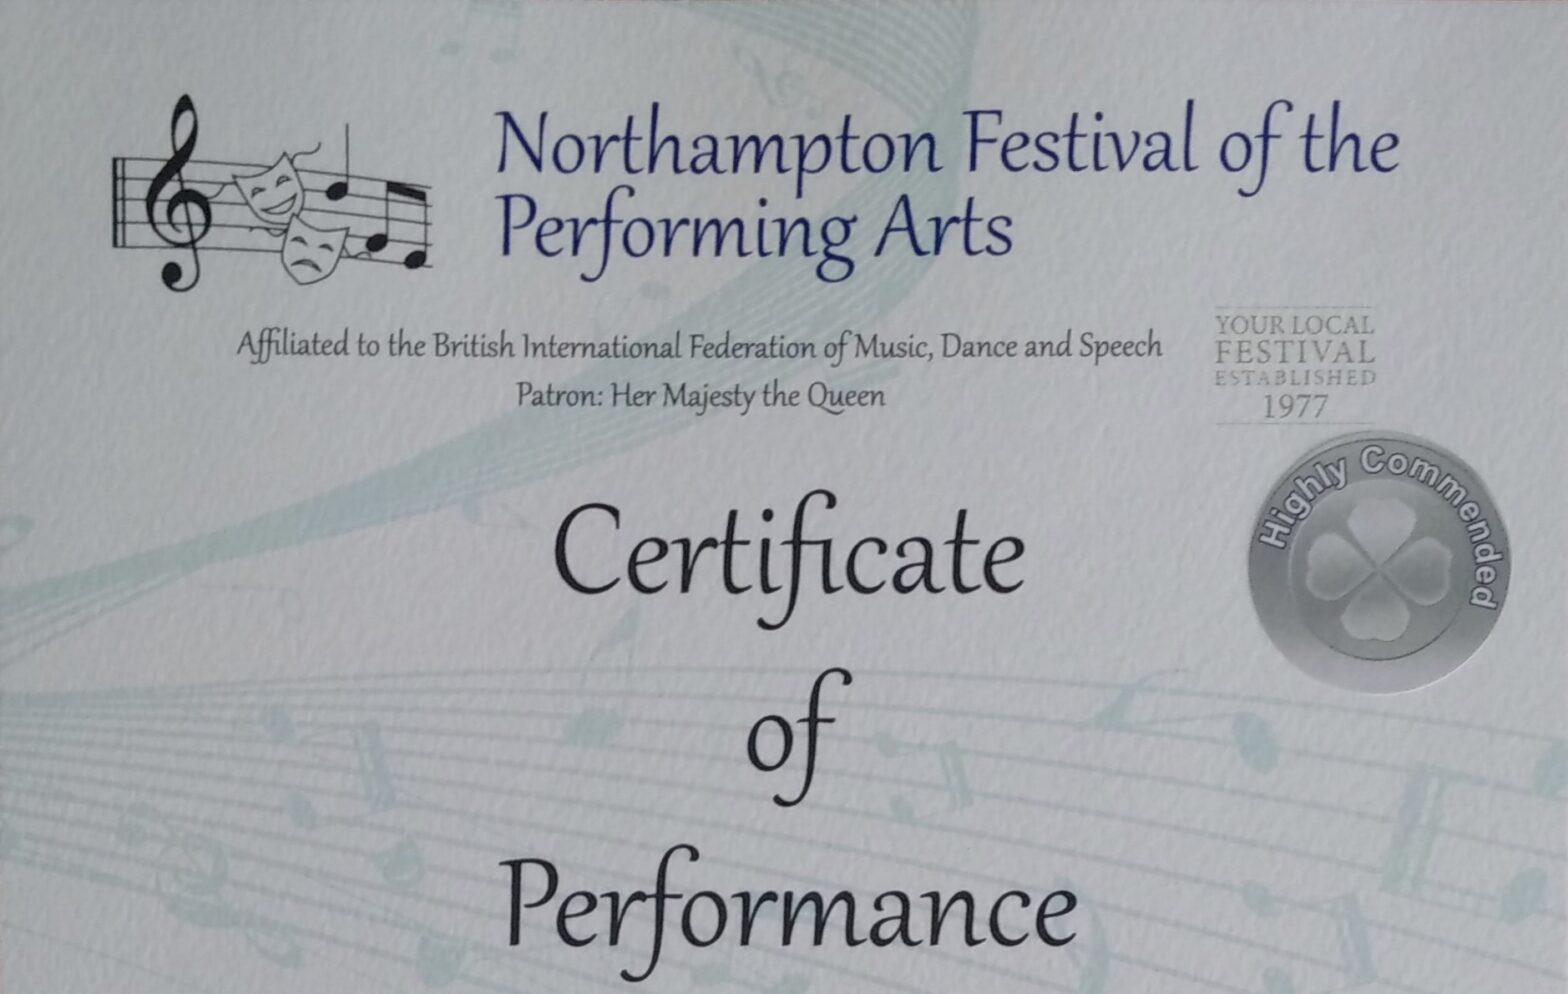 Northampton Festival of the Performing Arts